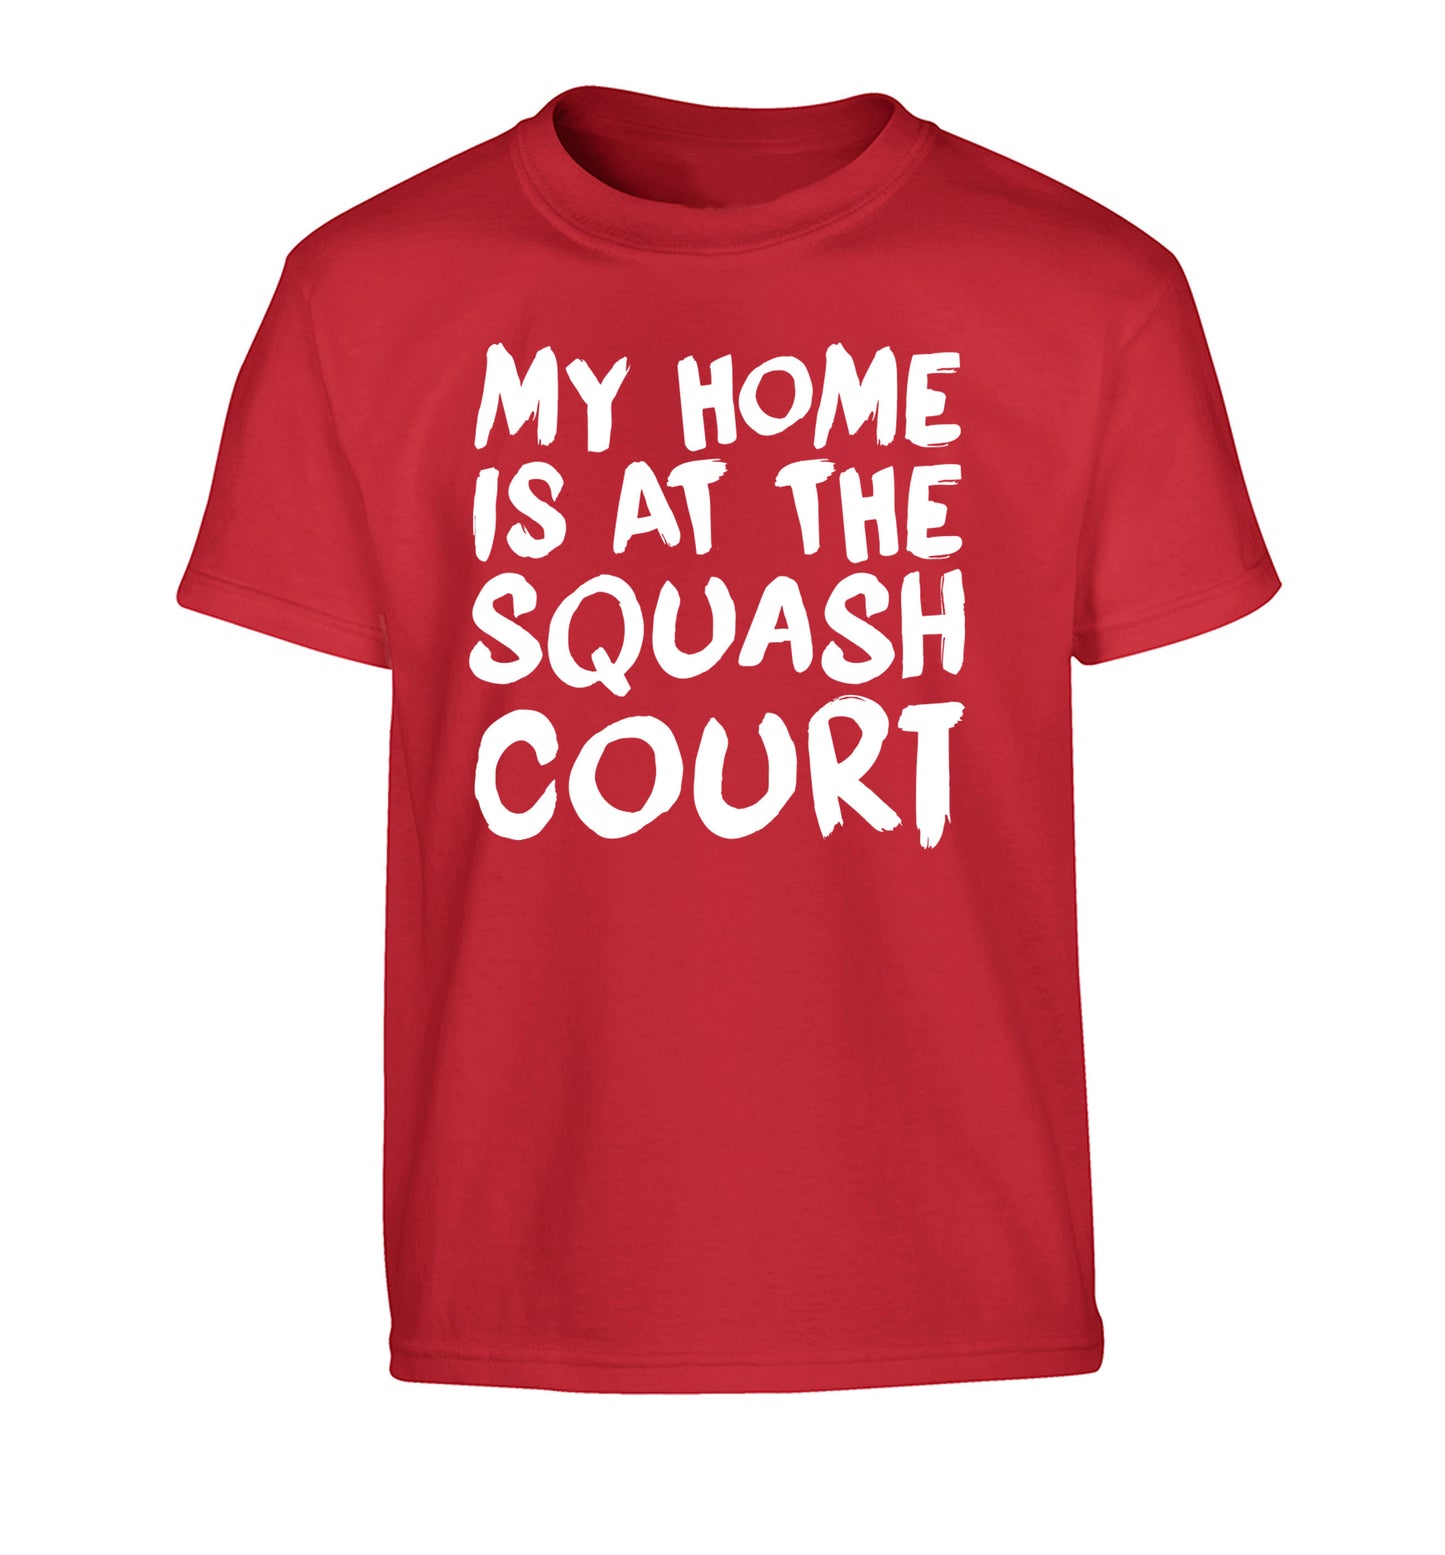 My home is at the squash court Children's red Tshirt 12-14 Years